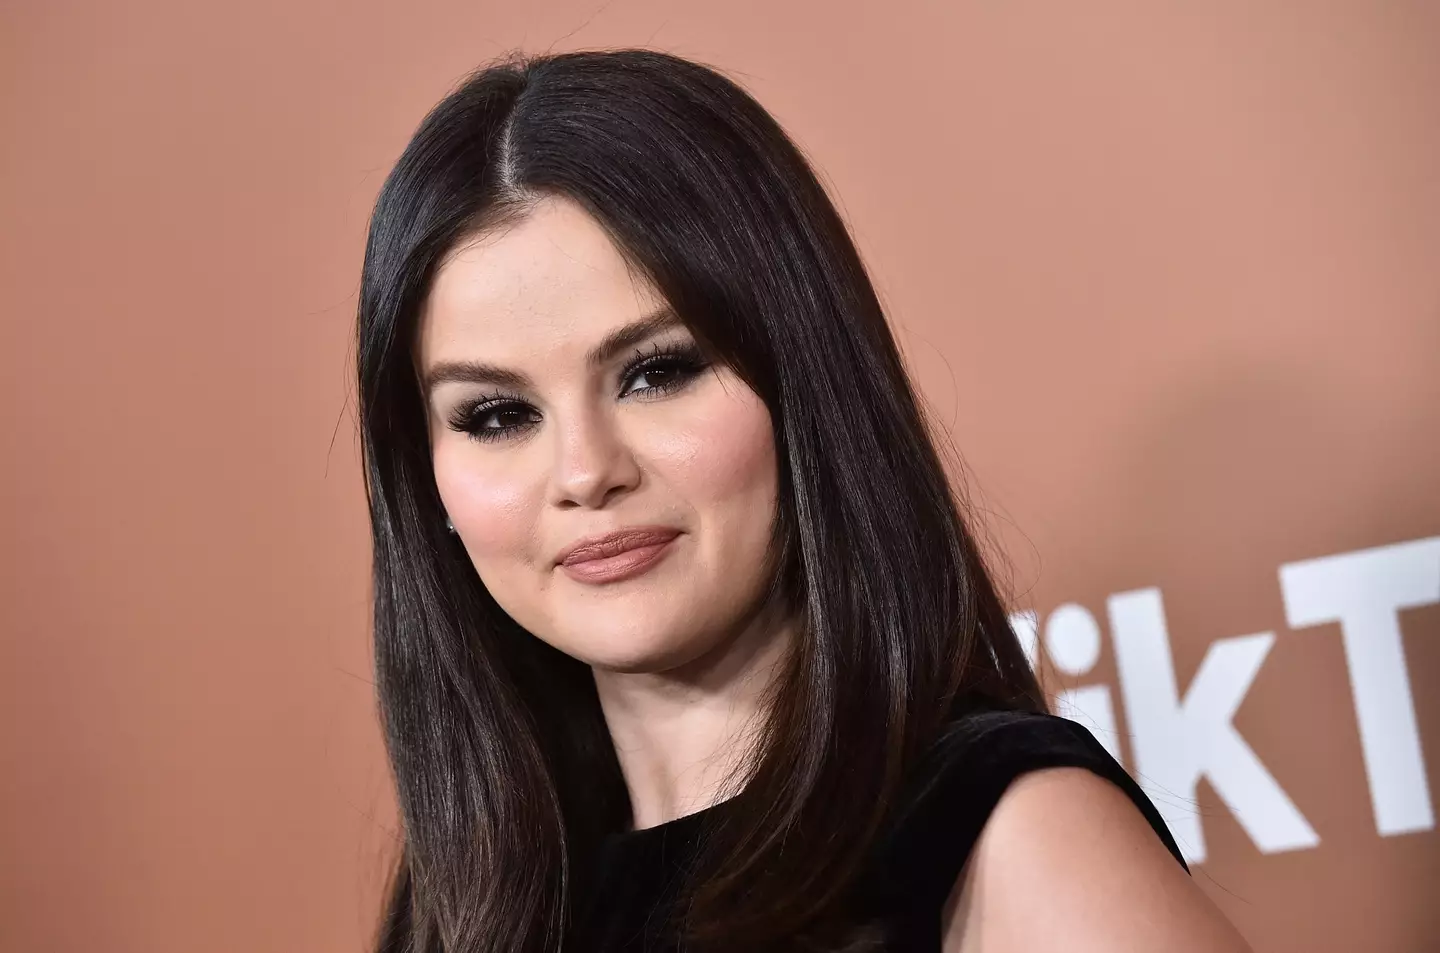 Fans think Selena Gomez is the inspiration for HBO's The Idol.